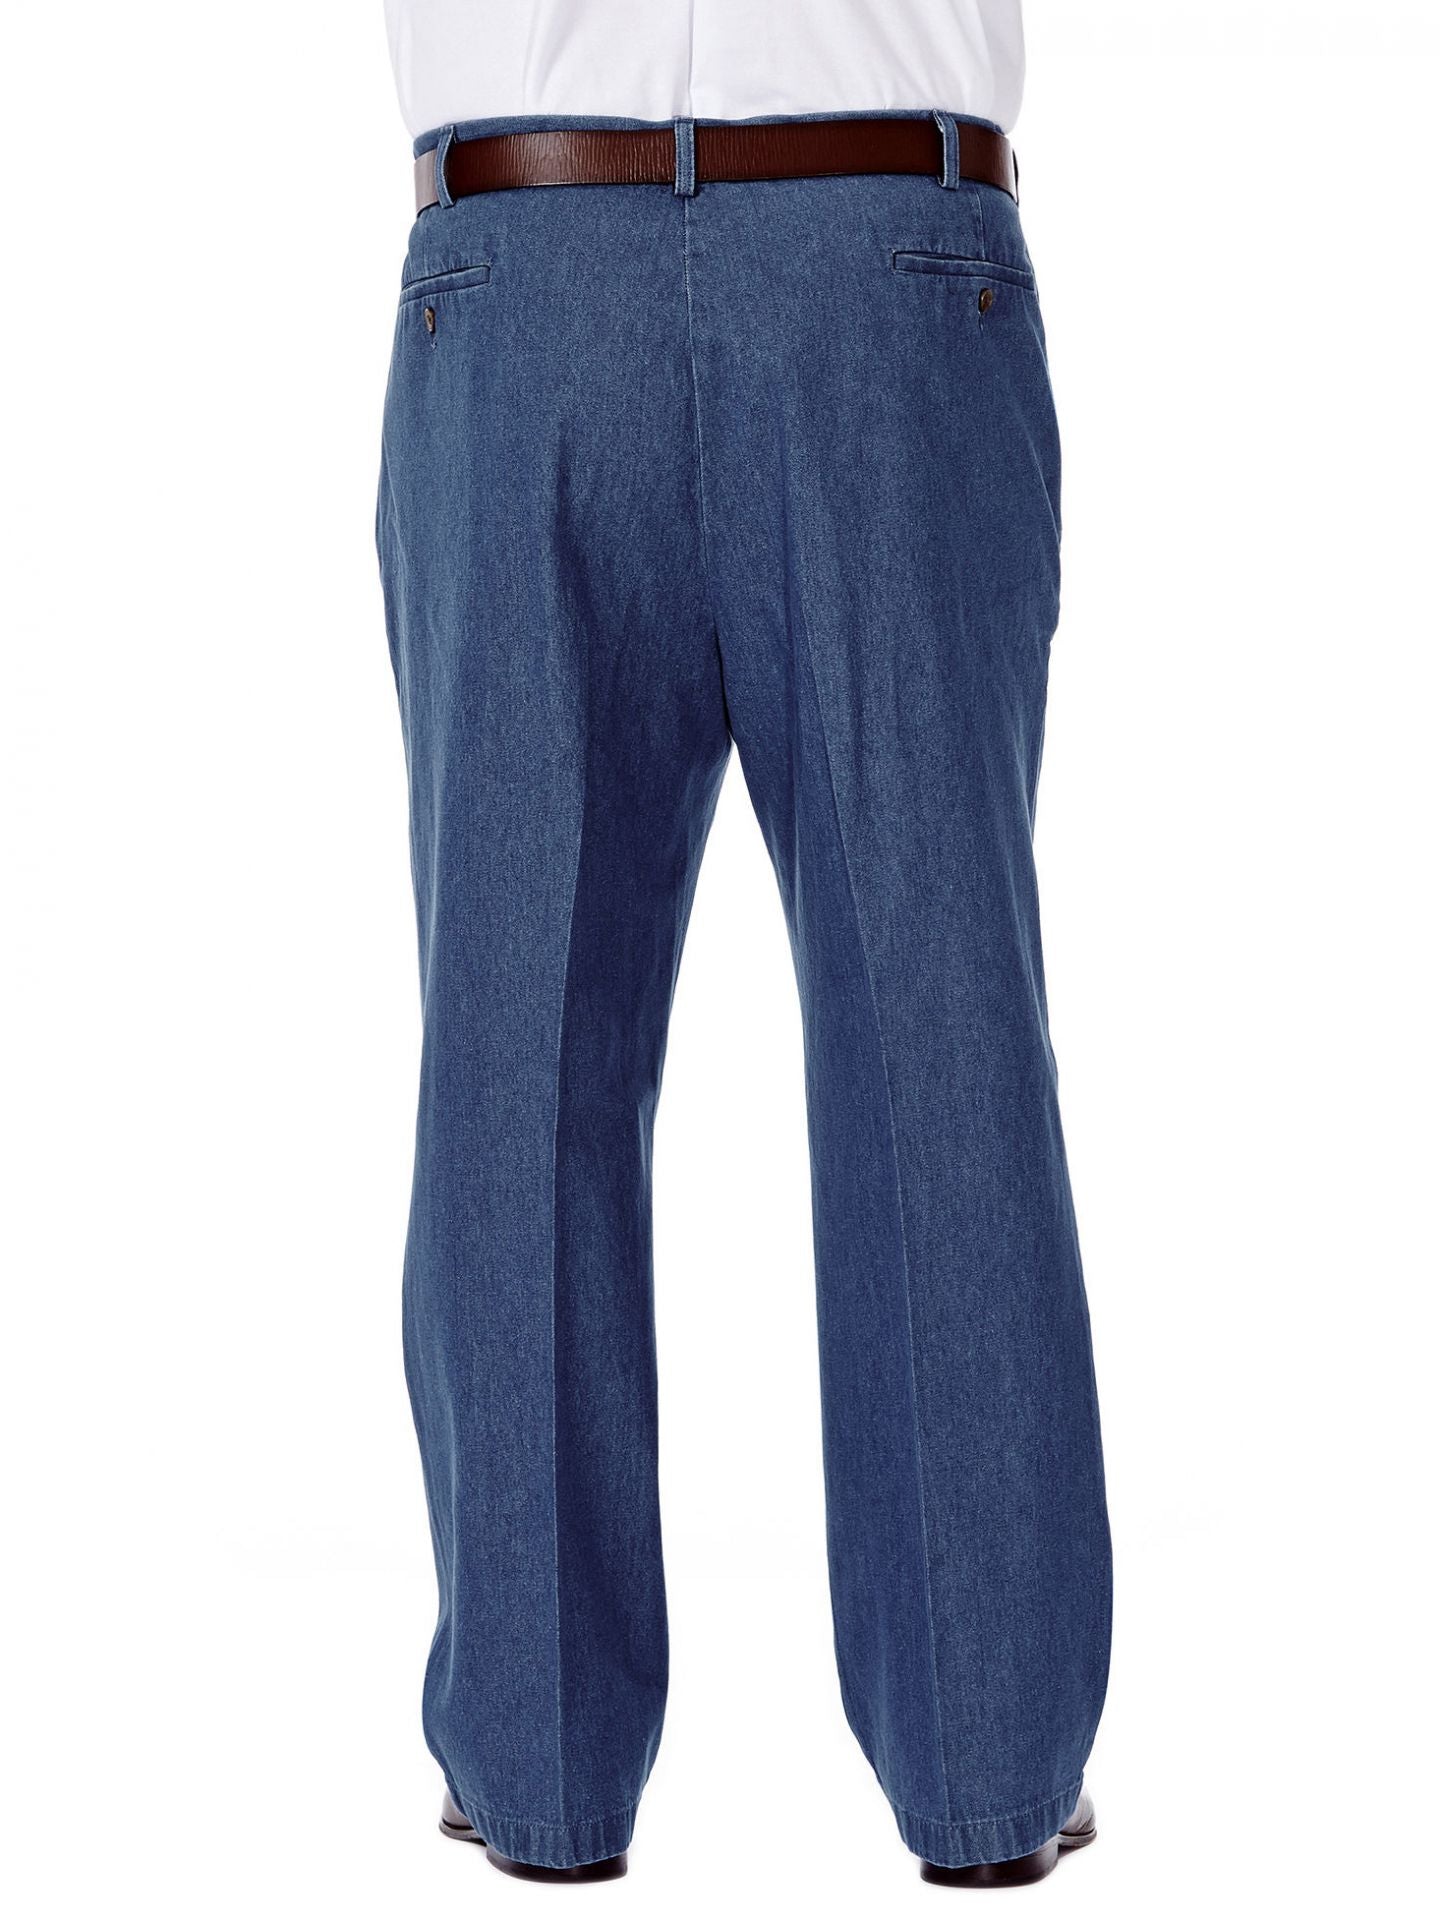 Big and Tall Work to Weekend Pleated Denim Pants